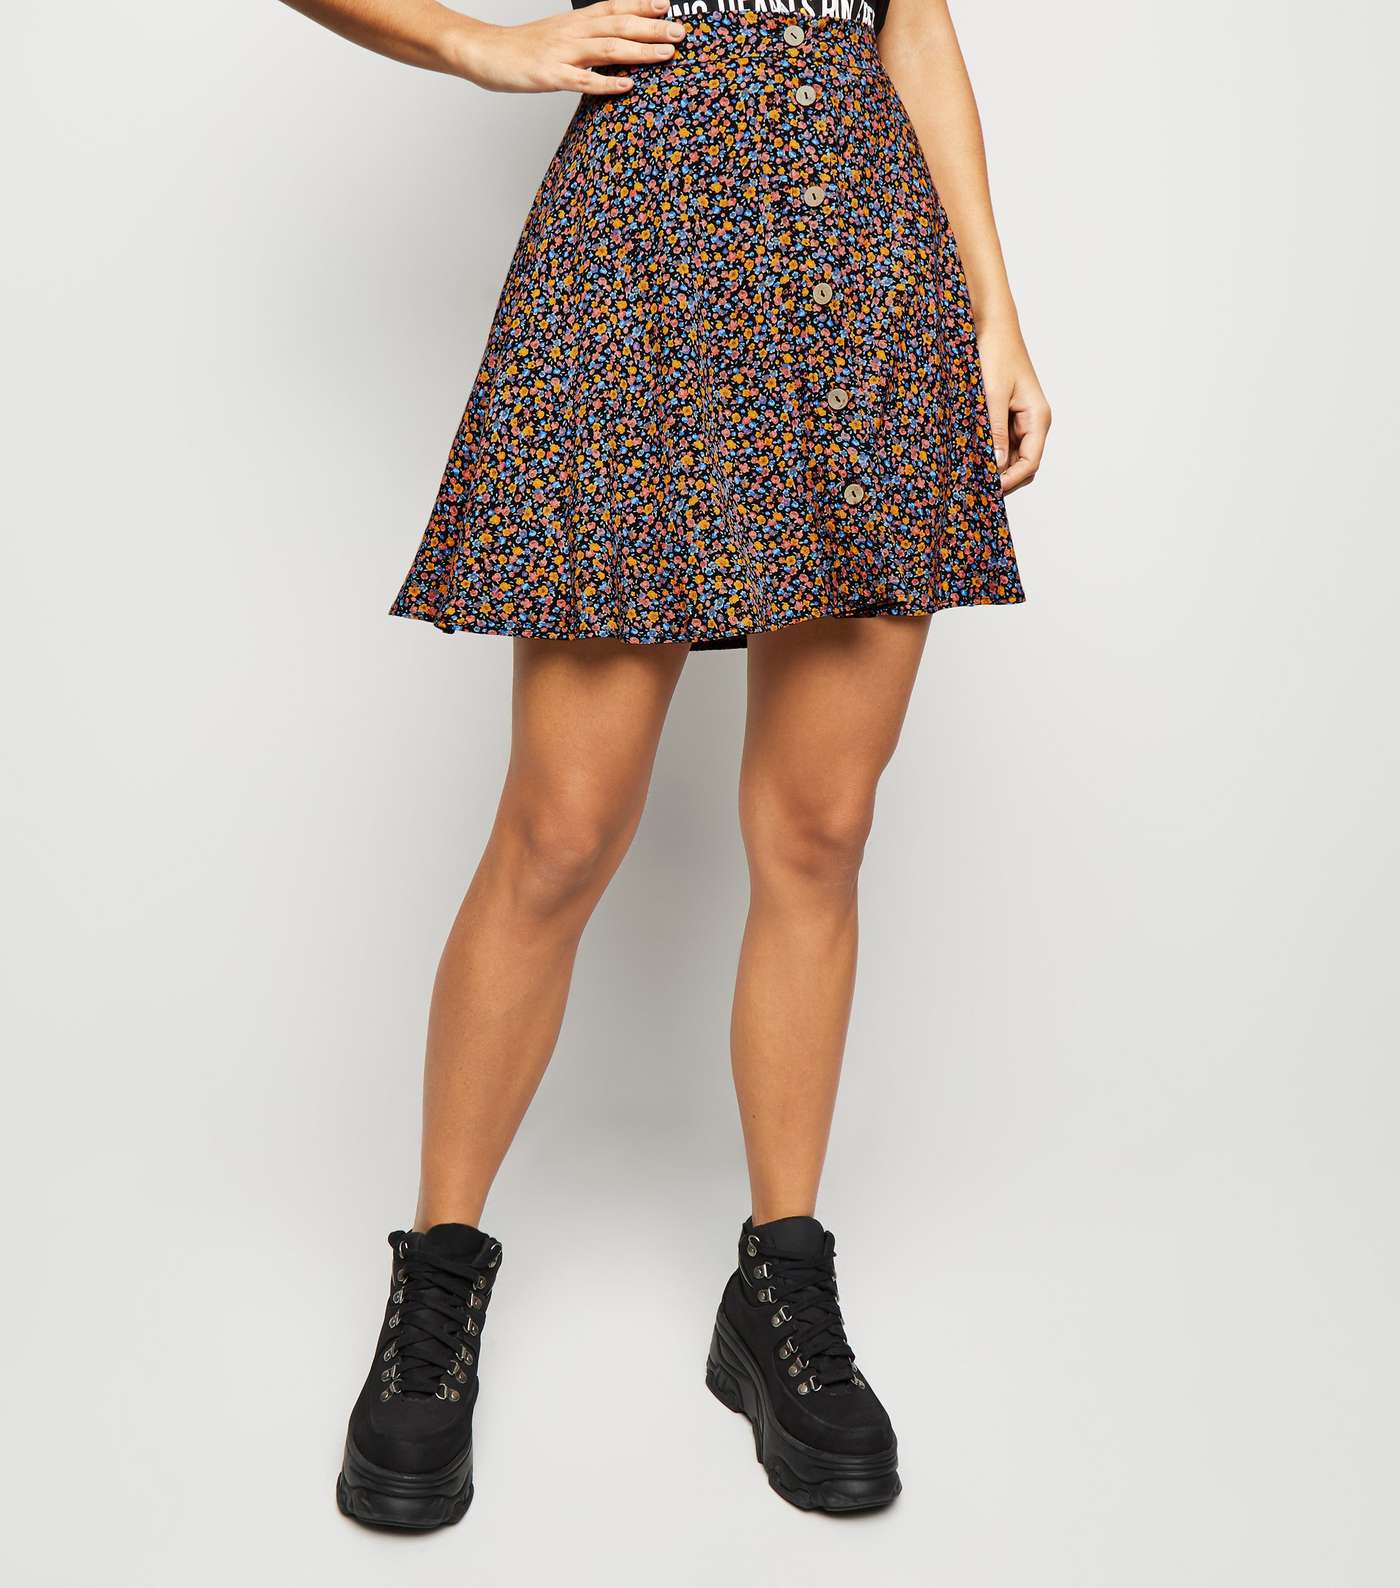 Black Ditsy Floral Button Up Mini Skirt Image 2